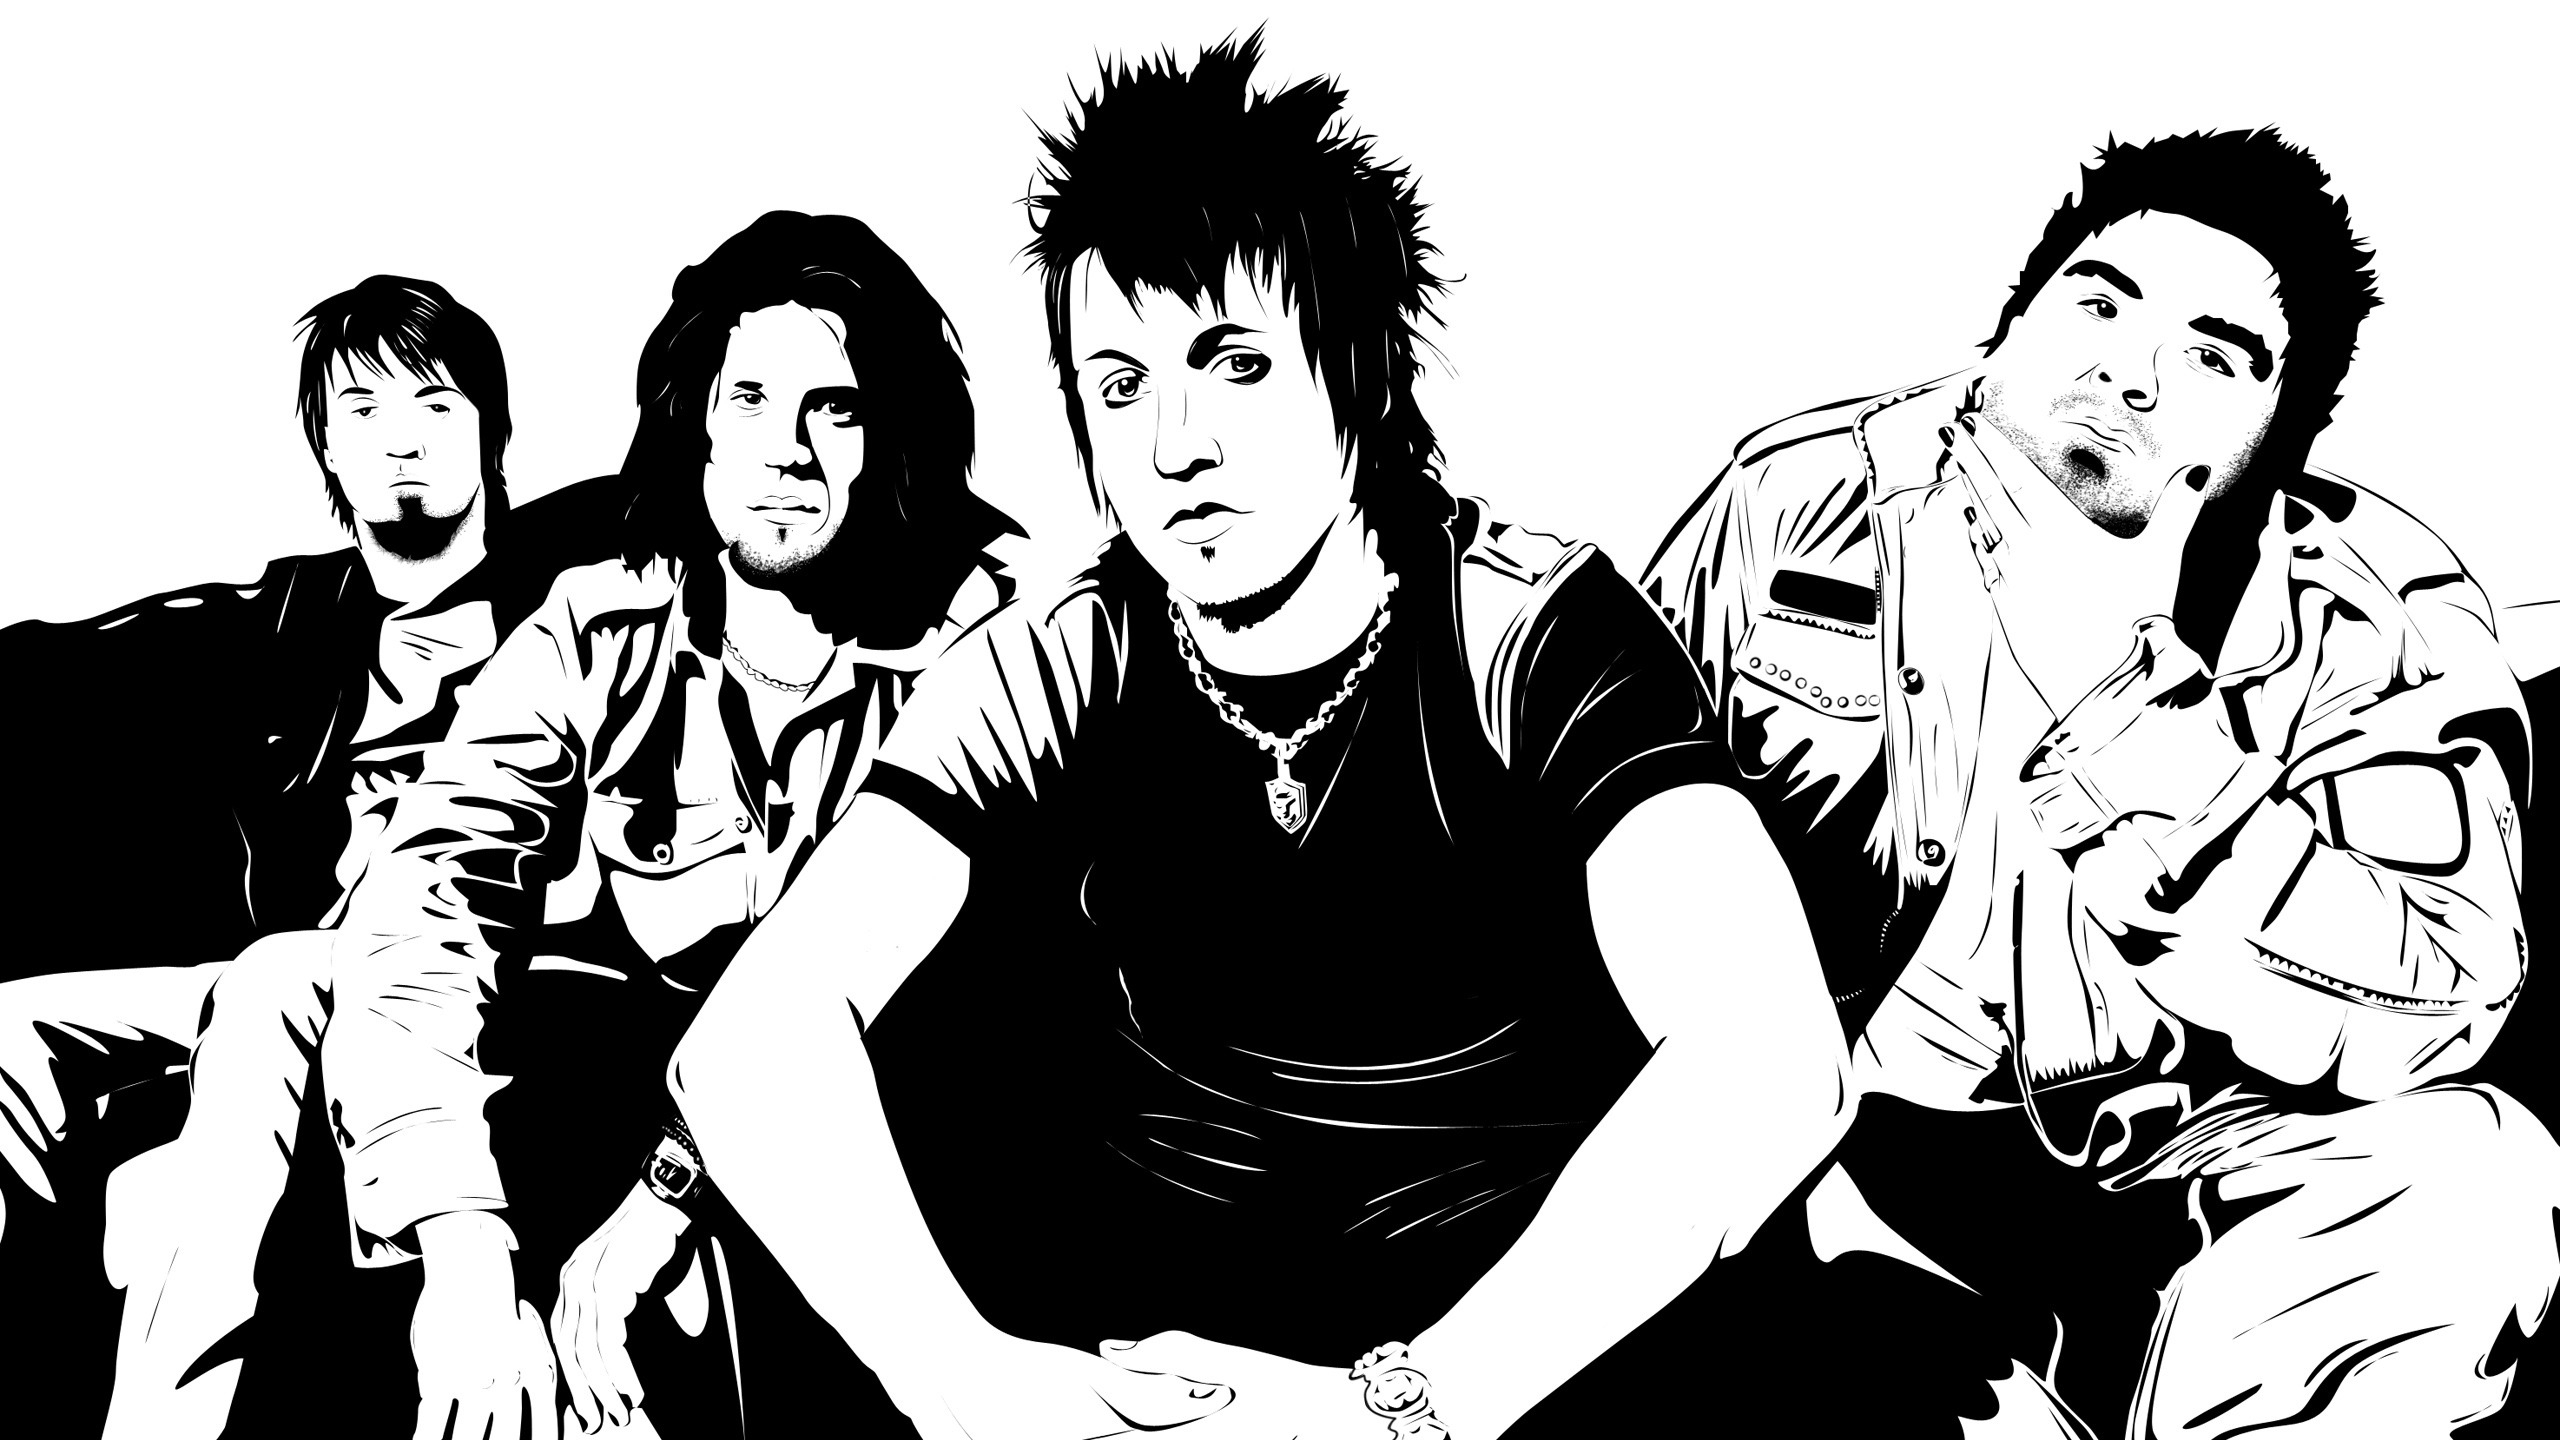 Papa Roach for 2560x1440 HDTV resolution